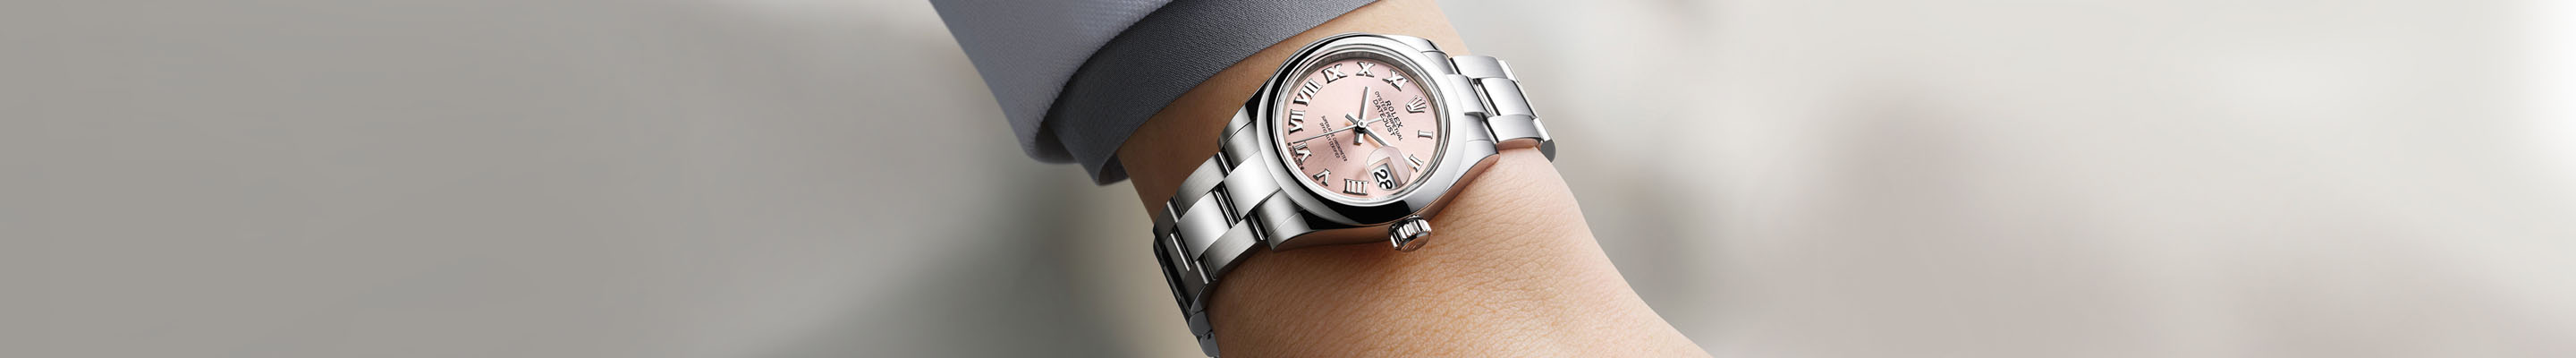 Women's Watches collection